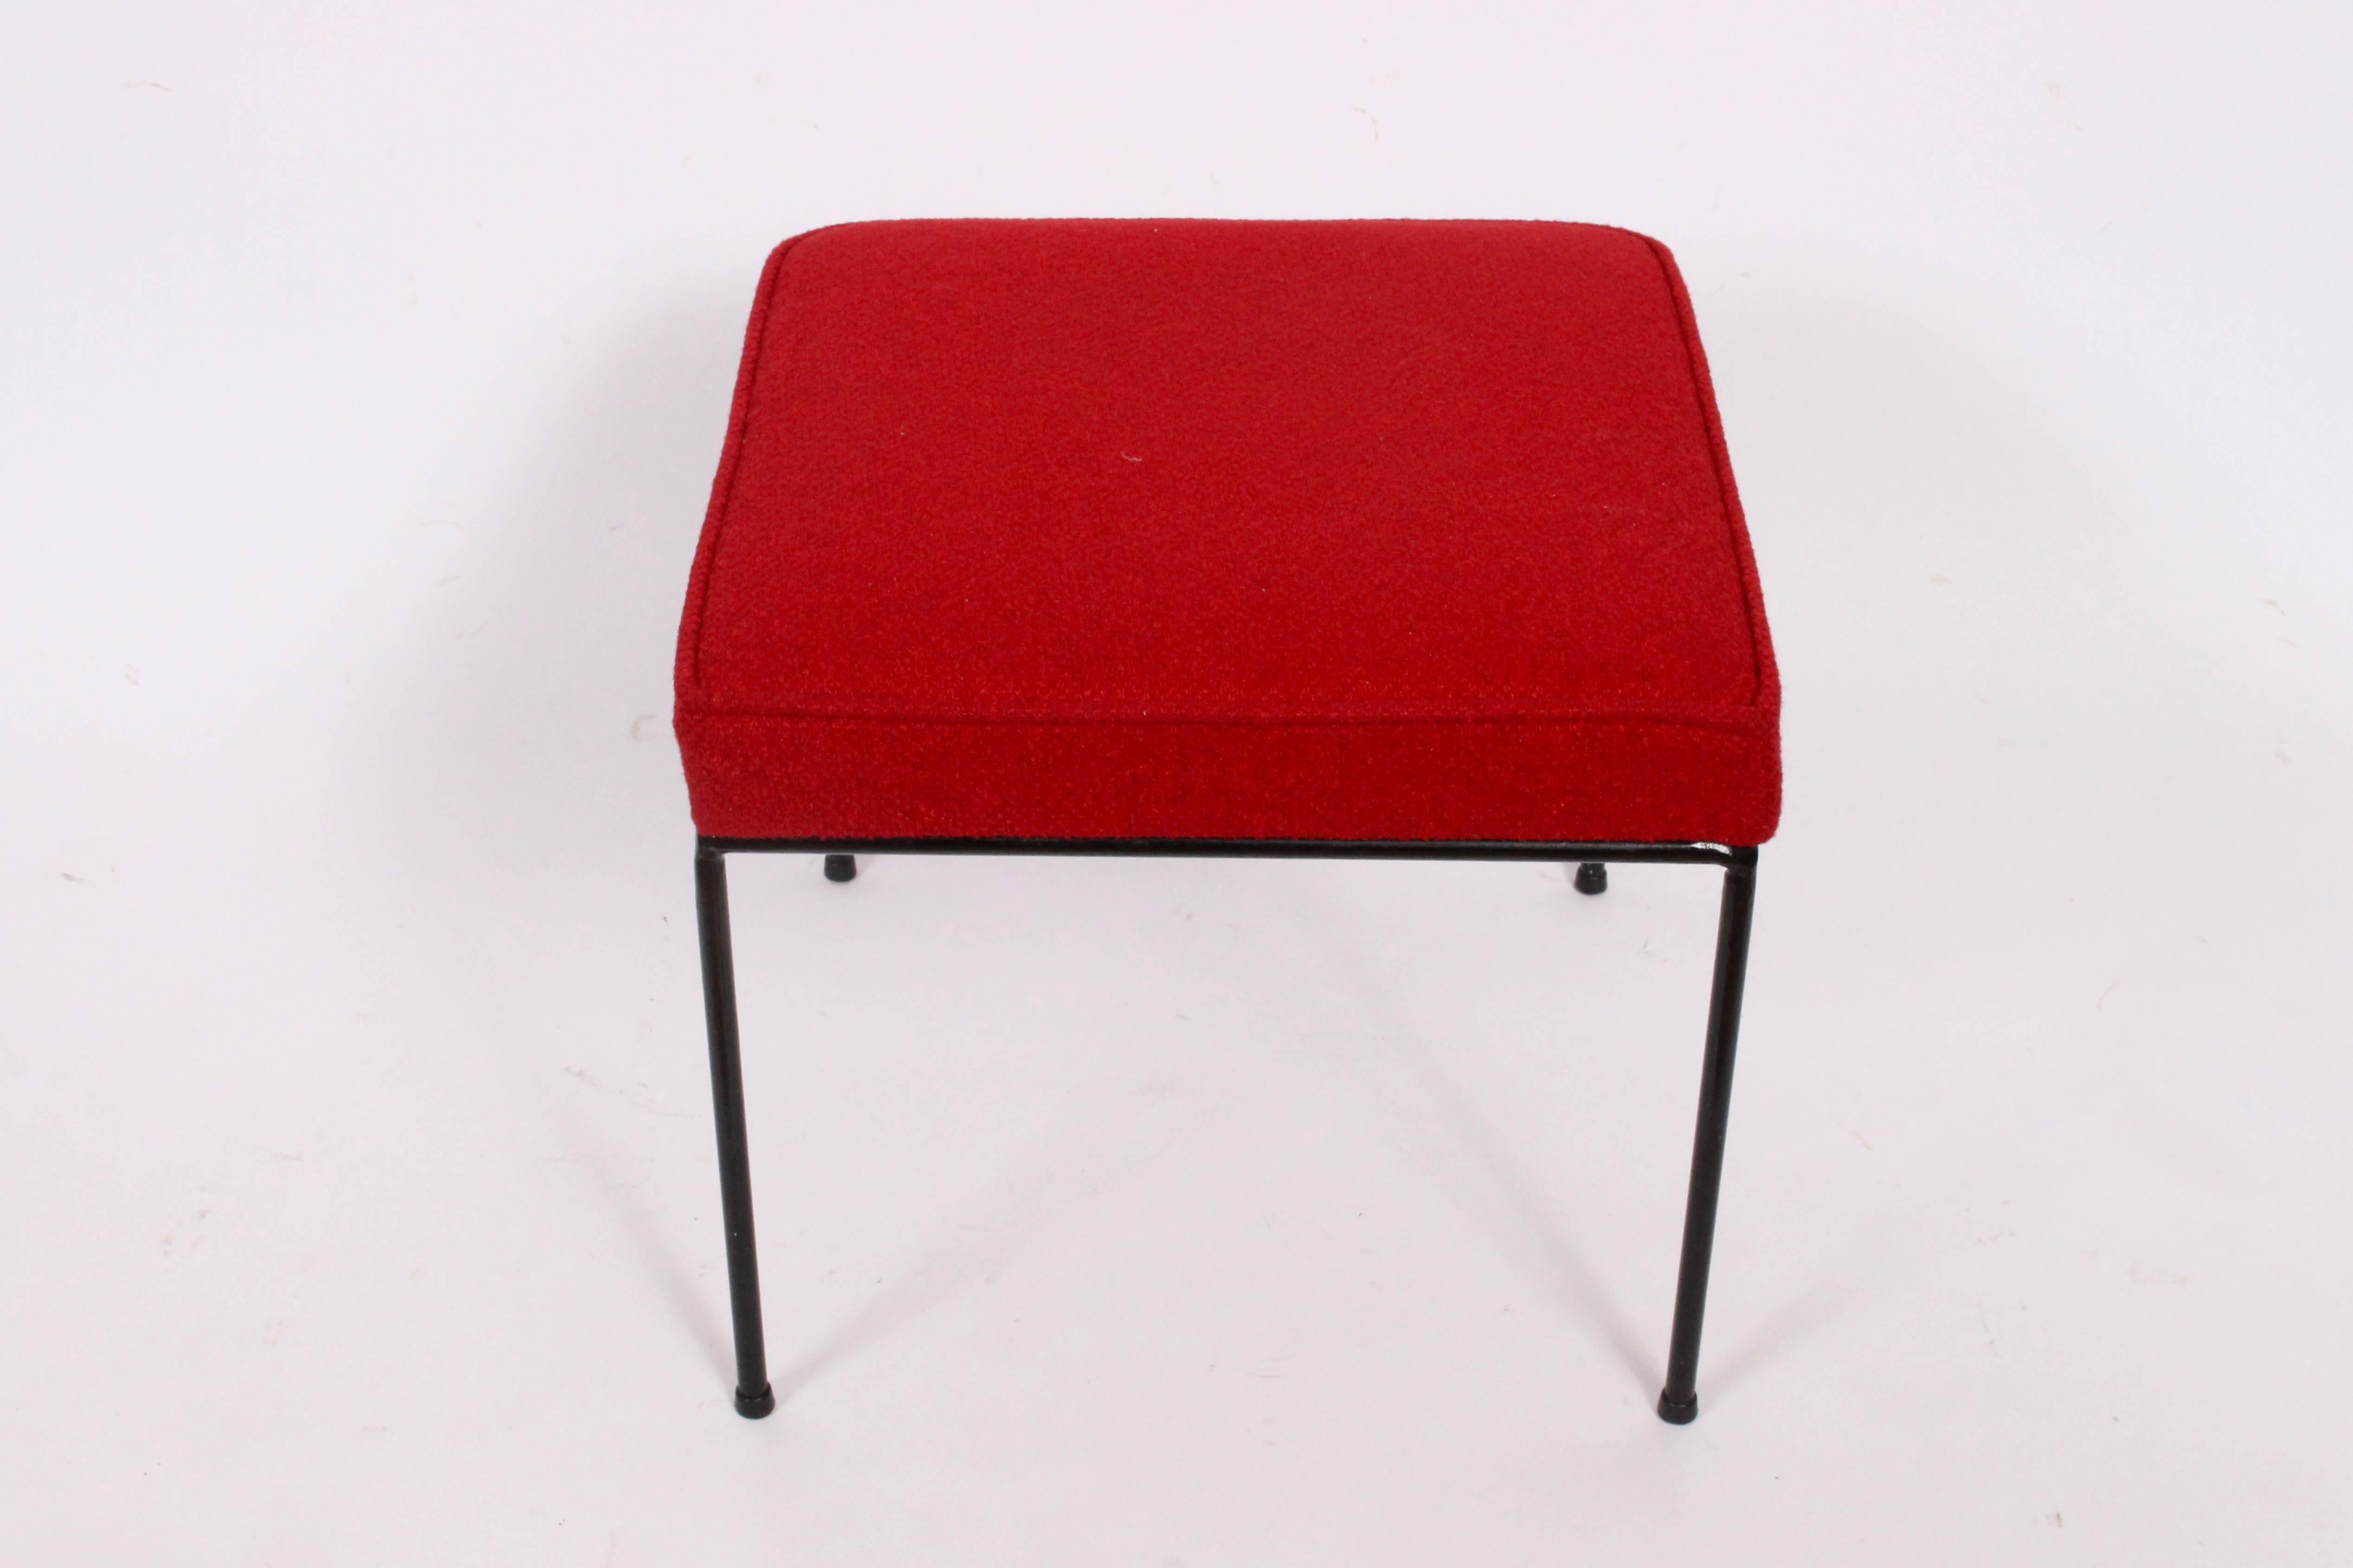 American Mid-Century Modern Frederick Weinberg black wrought iron ottoman. Featuring a sturdy Wrought Iron framework and newly upholstered in bright red wool fabric and slip cover in same fabric. With protective black plastic capped feet. Versatile.